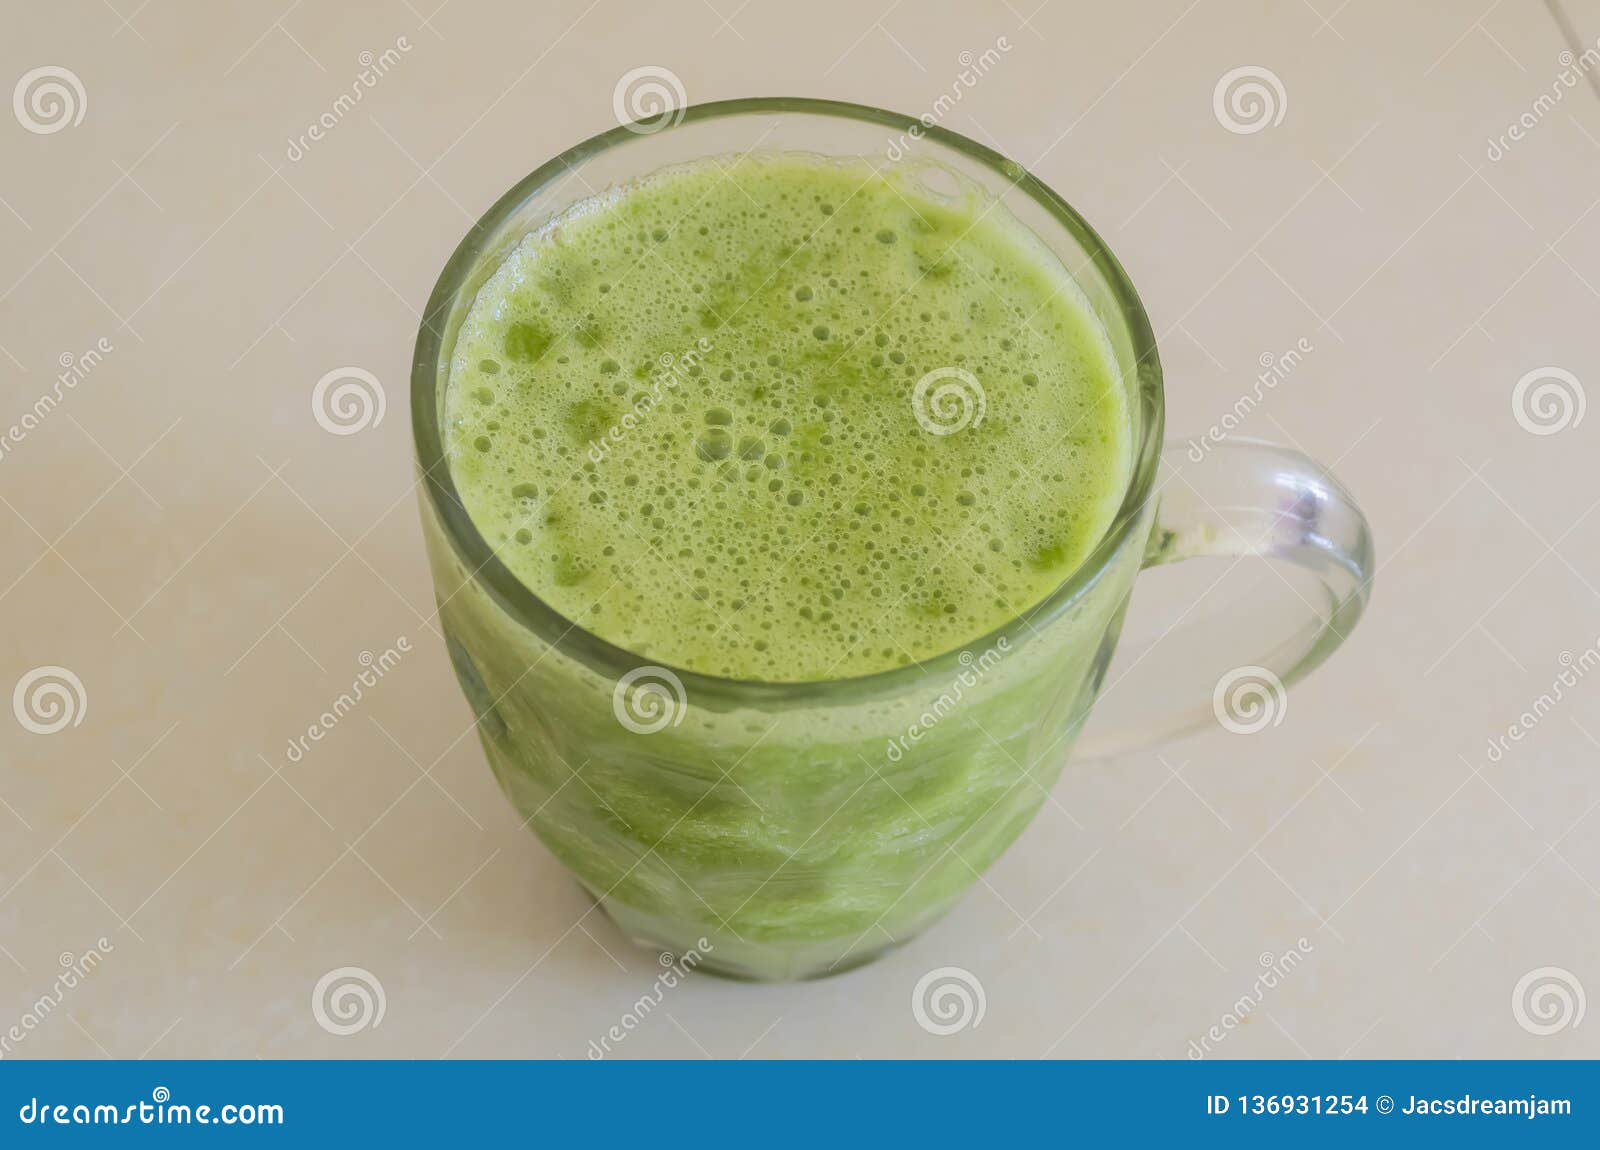 blend of spondias dulcis, spinach, giner, and lime